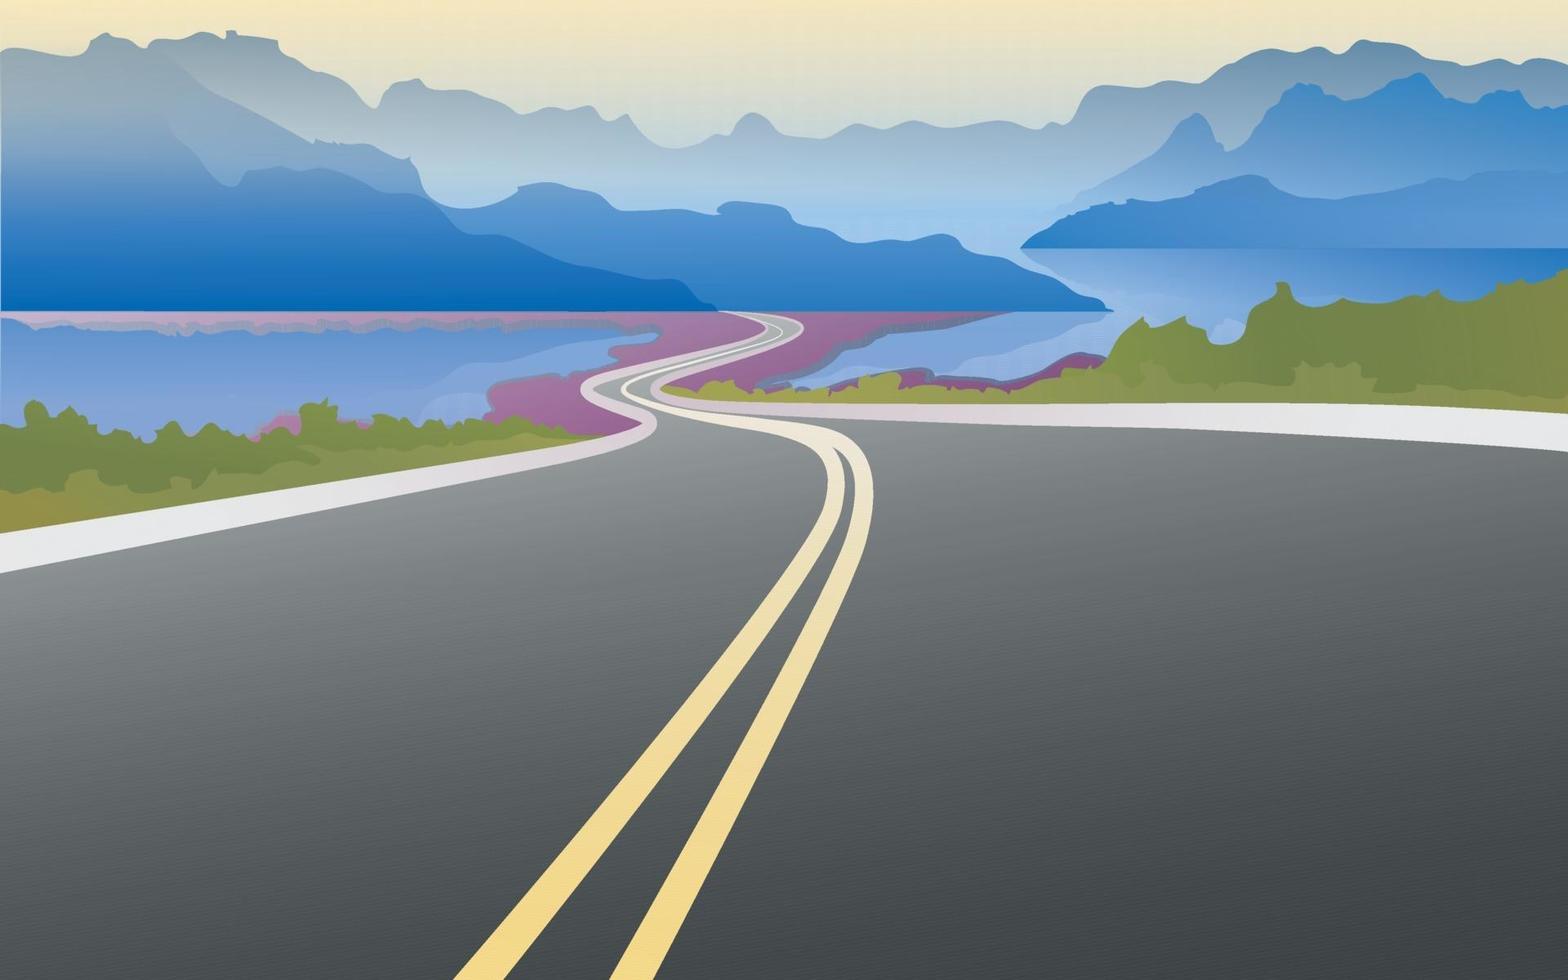 The road stretches through mountains and rivers vector